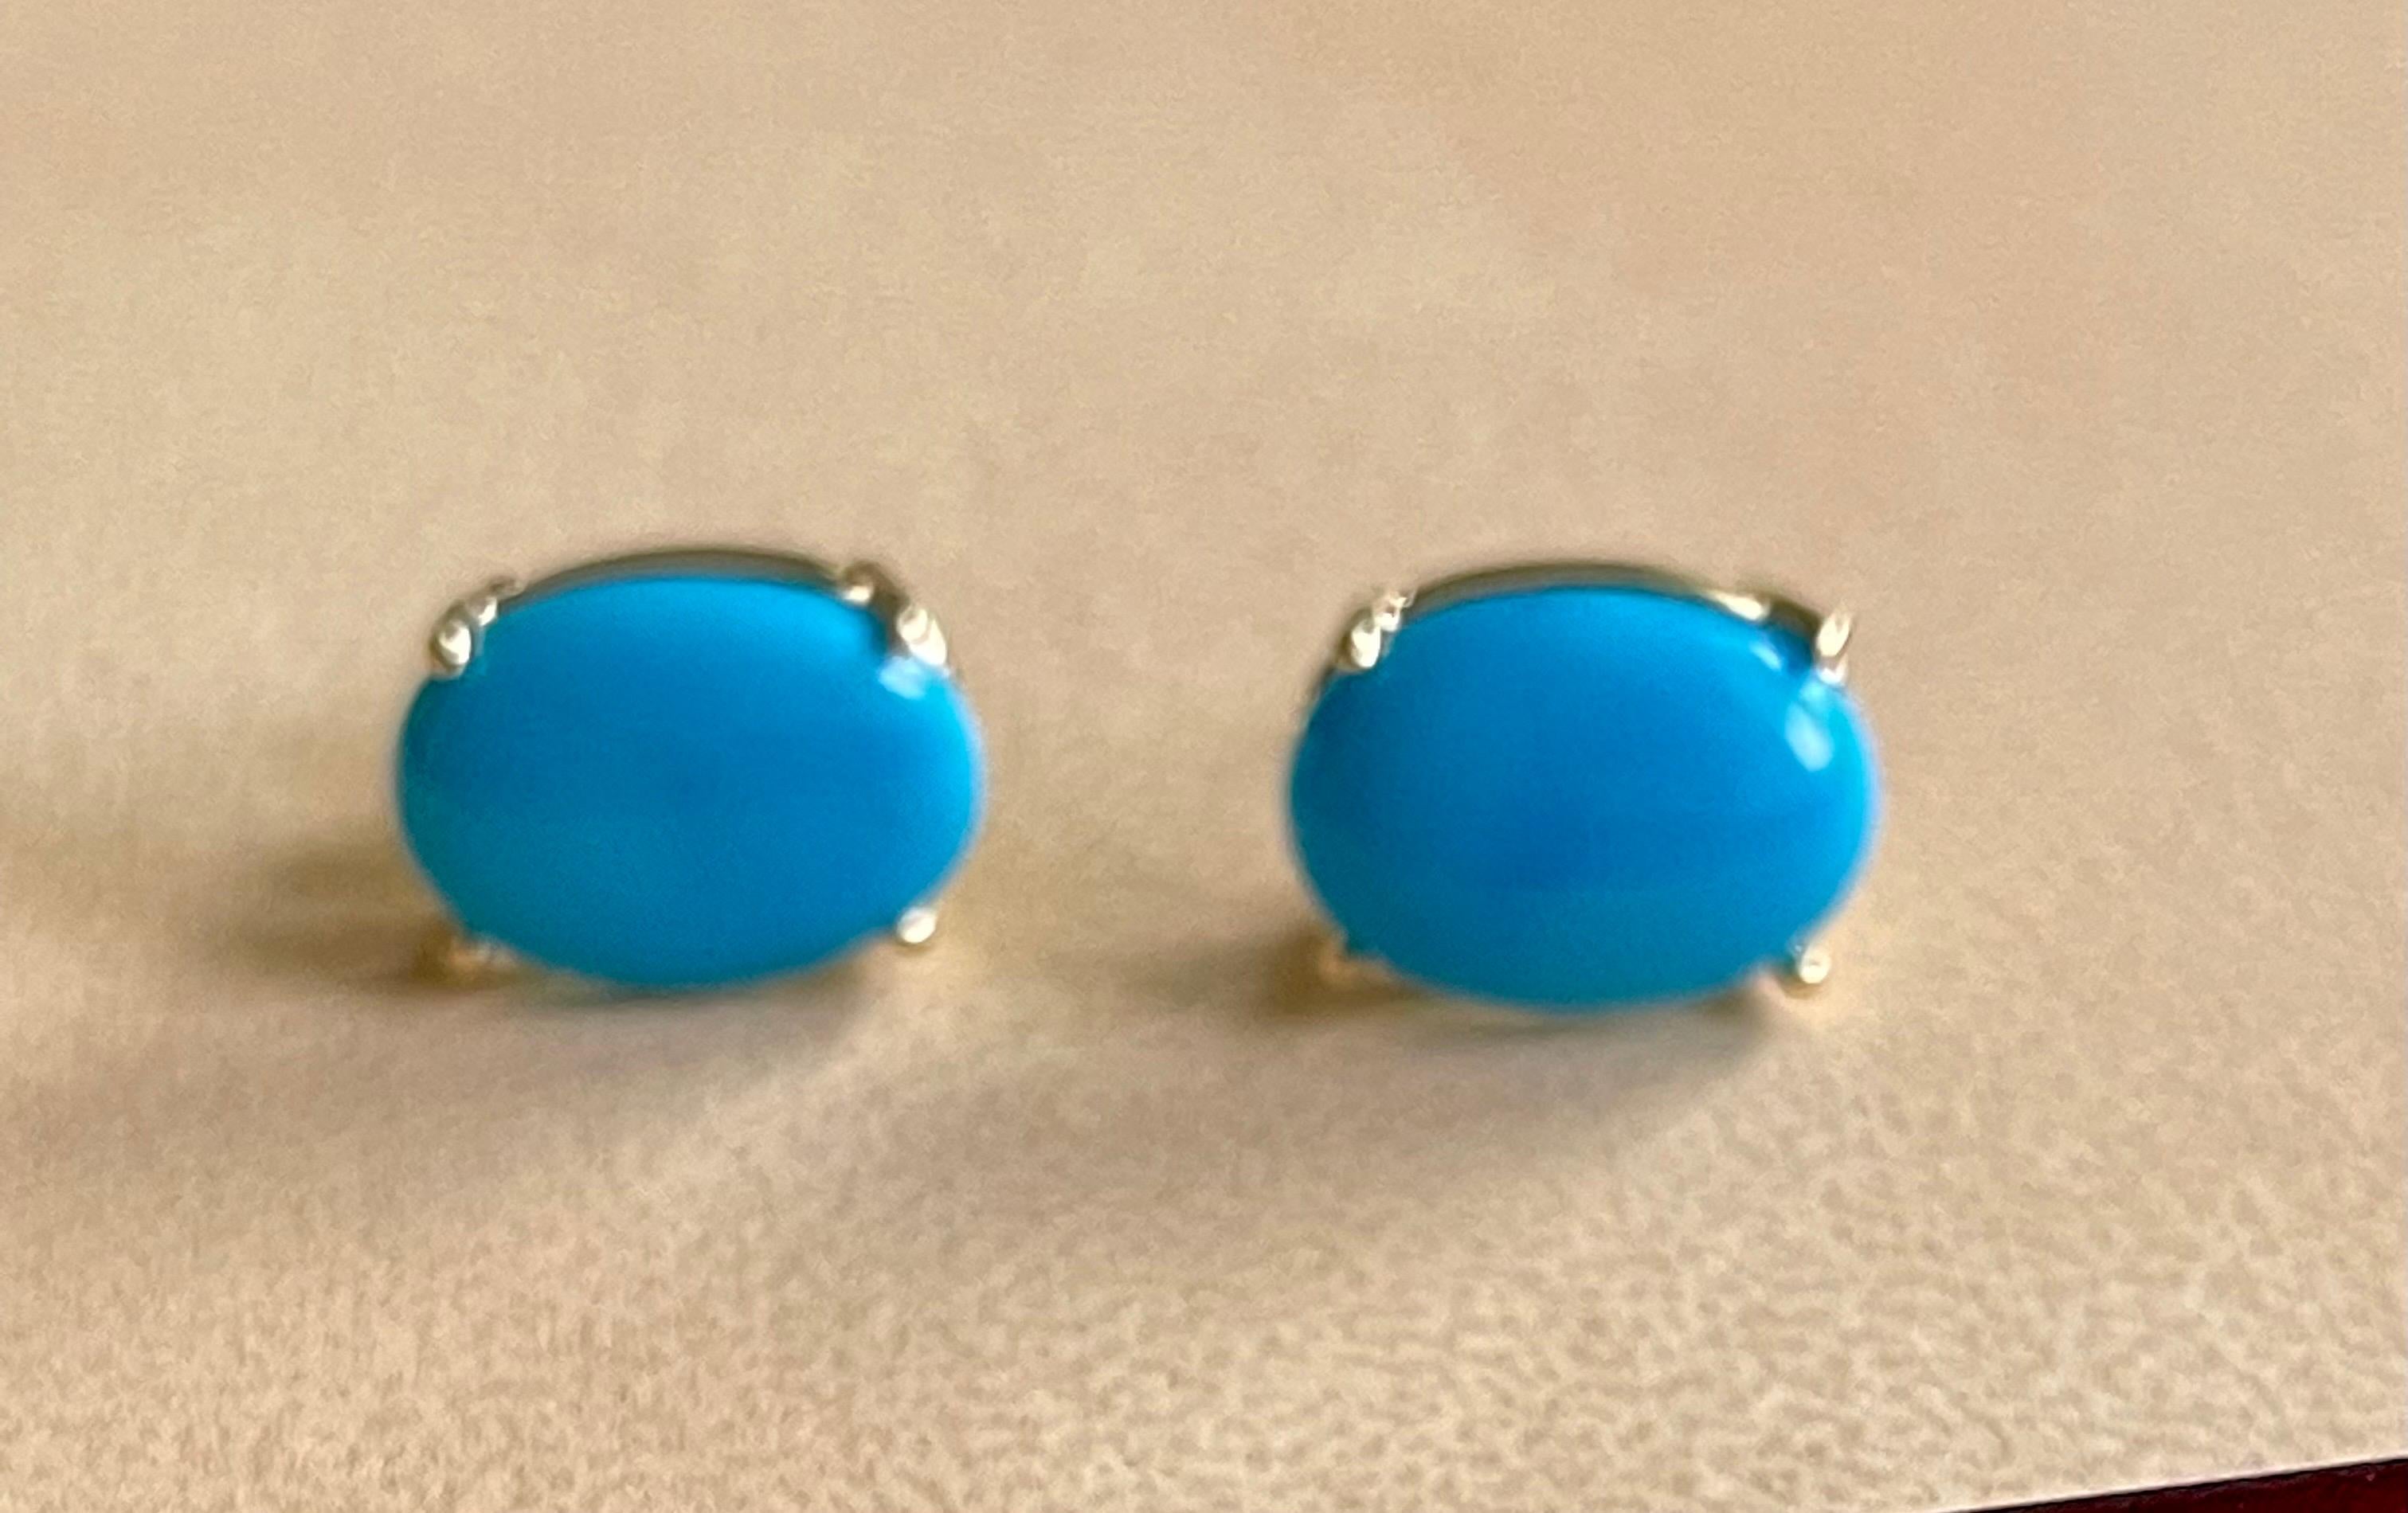 Approximately 8 Ct Oval Natural  Sleeping Beauty Turquoise Stud Earrings 14 K Yellow Gold, Post Back
This exquisite pair of earrings are beautifully crafted with 14 karat Yellow  gold .
Weight of 14 K gold 3.5 Grams
Turquoise pair is natural